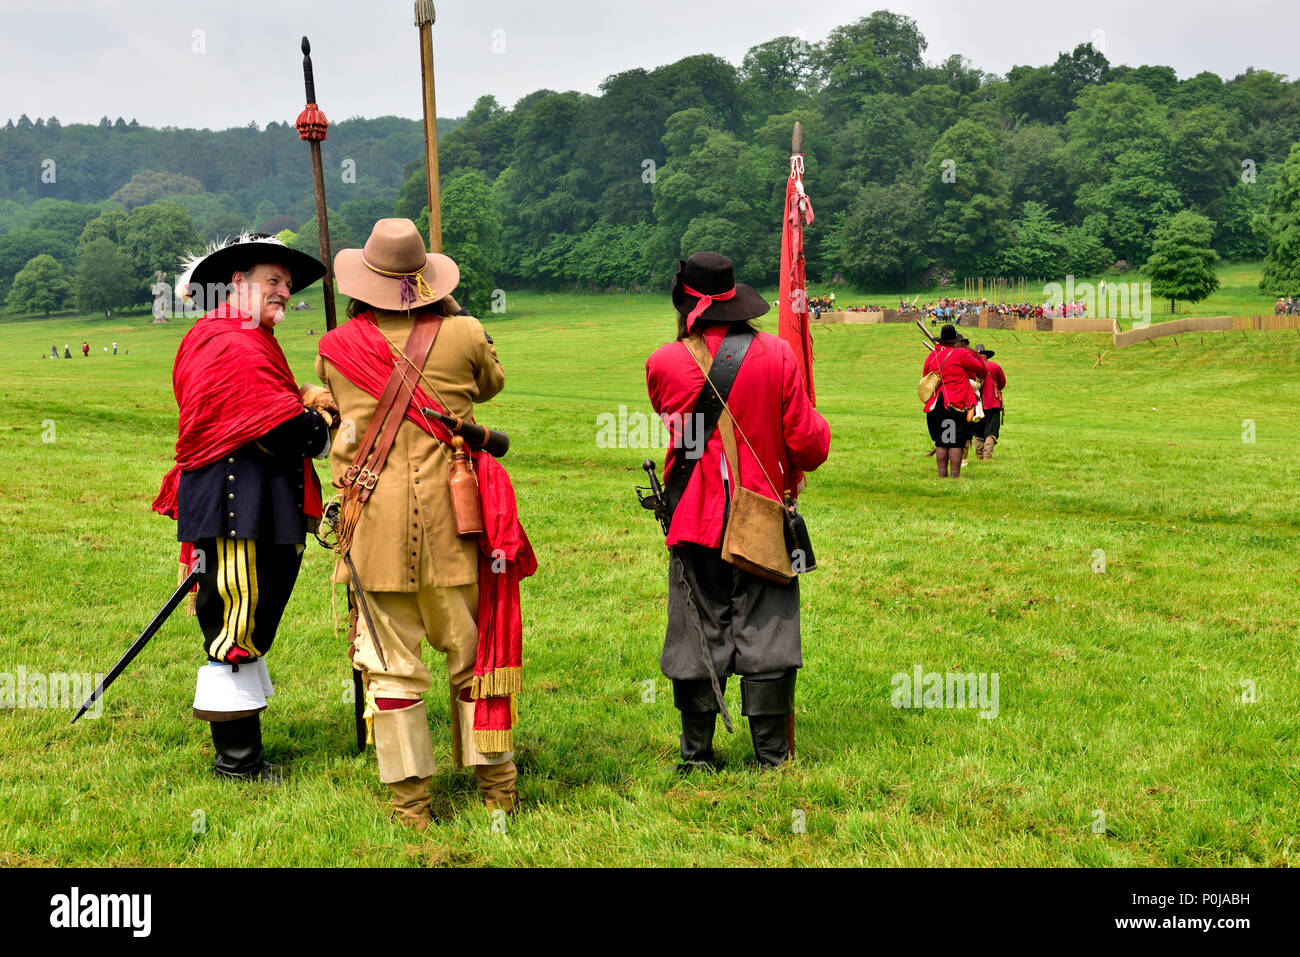 17th century military re-enactors in costume standing overlooking what will be field for Battle of Bristol in English Civil war of 1641 to 1652 Stock Photo